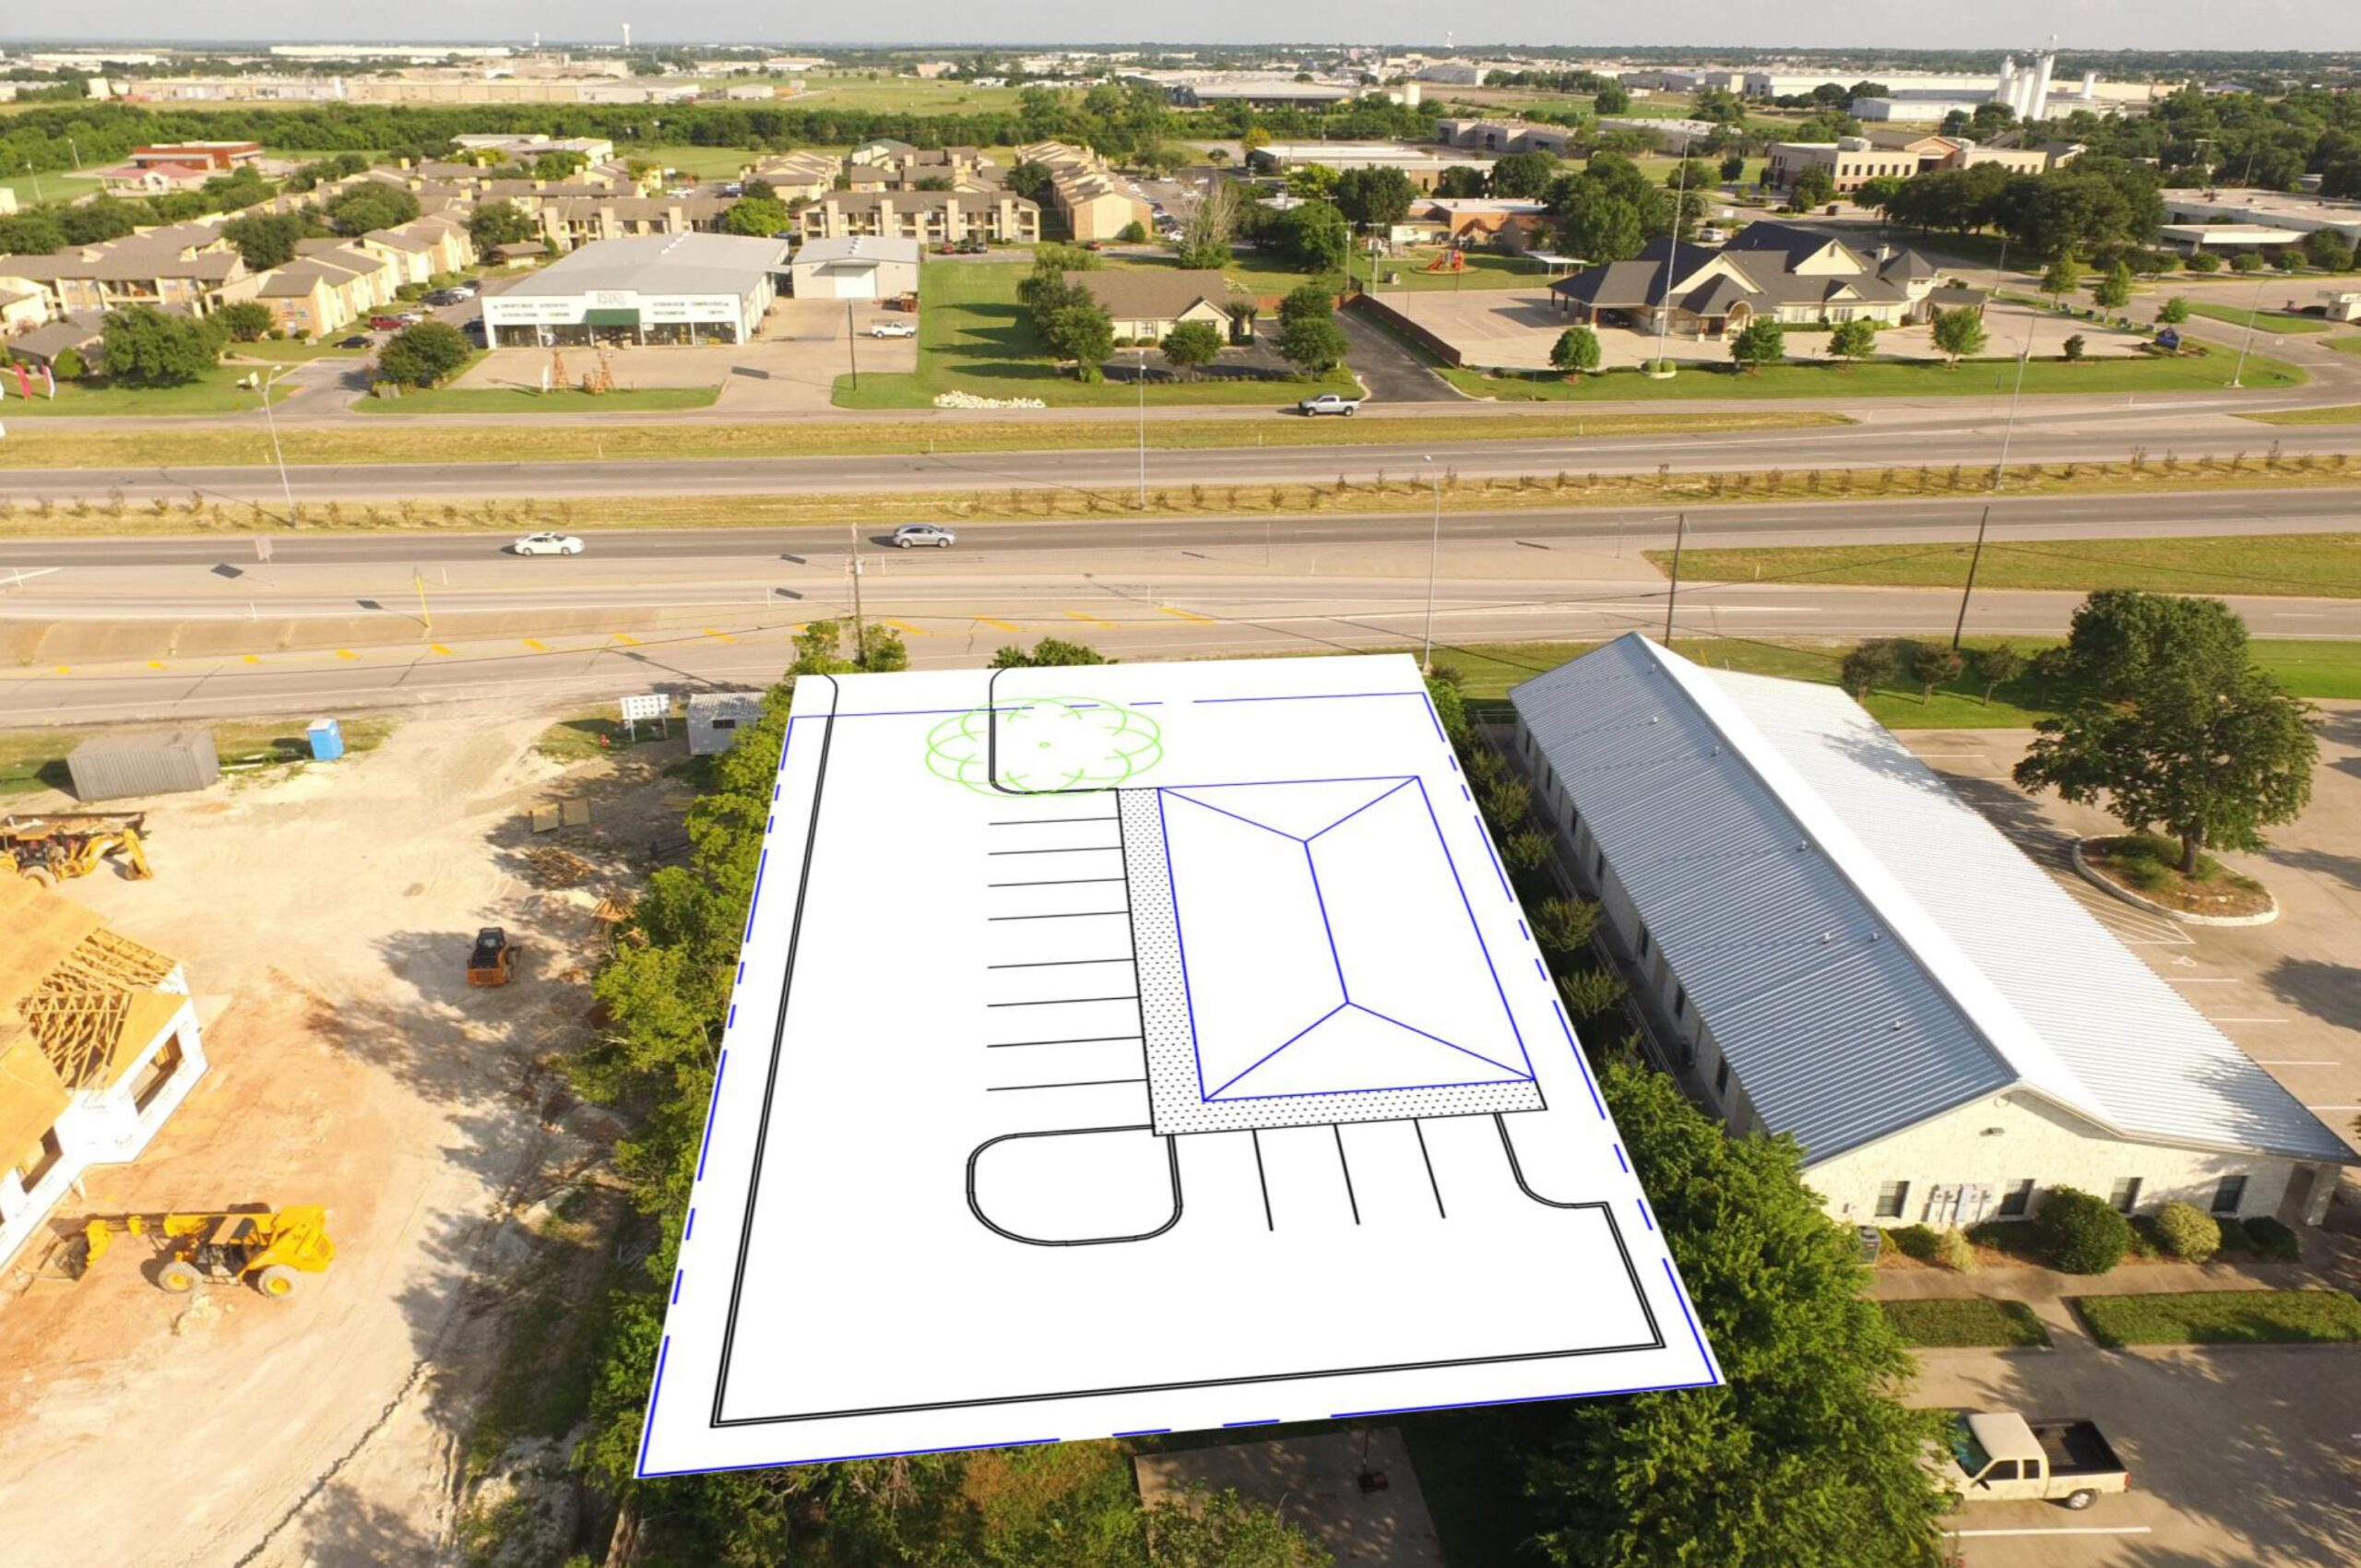 Build-To-Suit Office/Retail Site at Woodway Drive, Texas